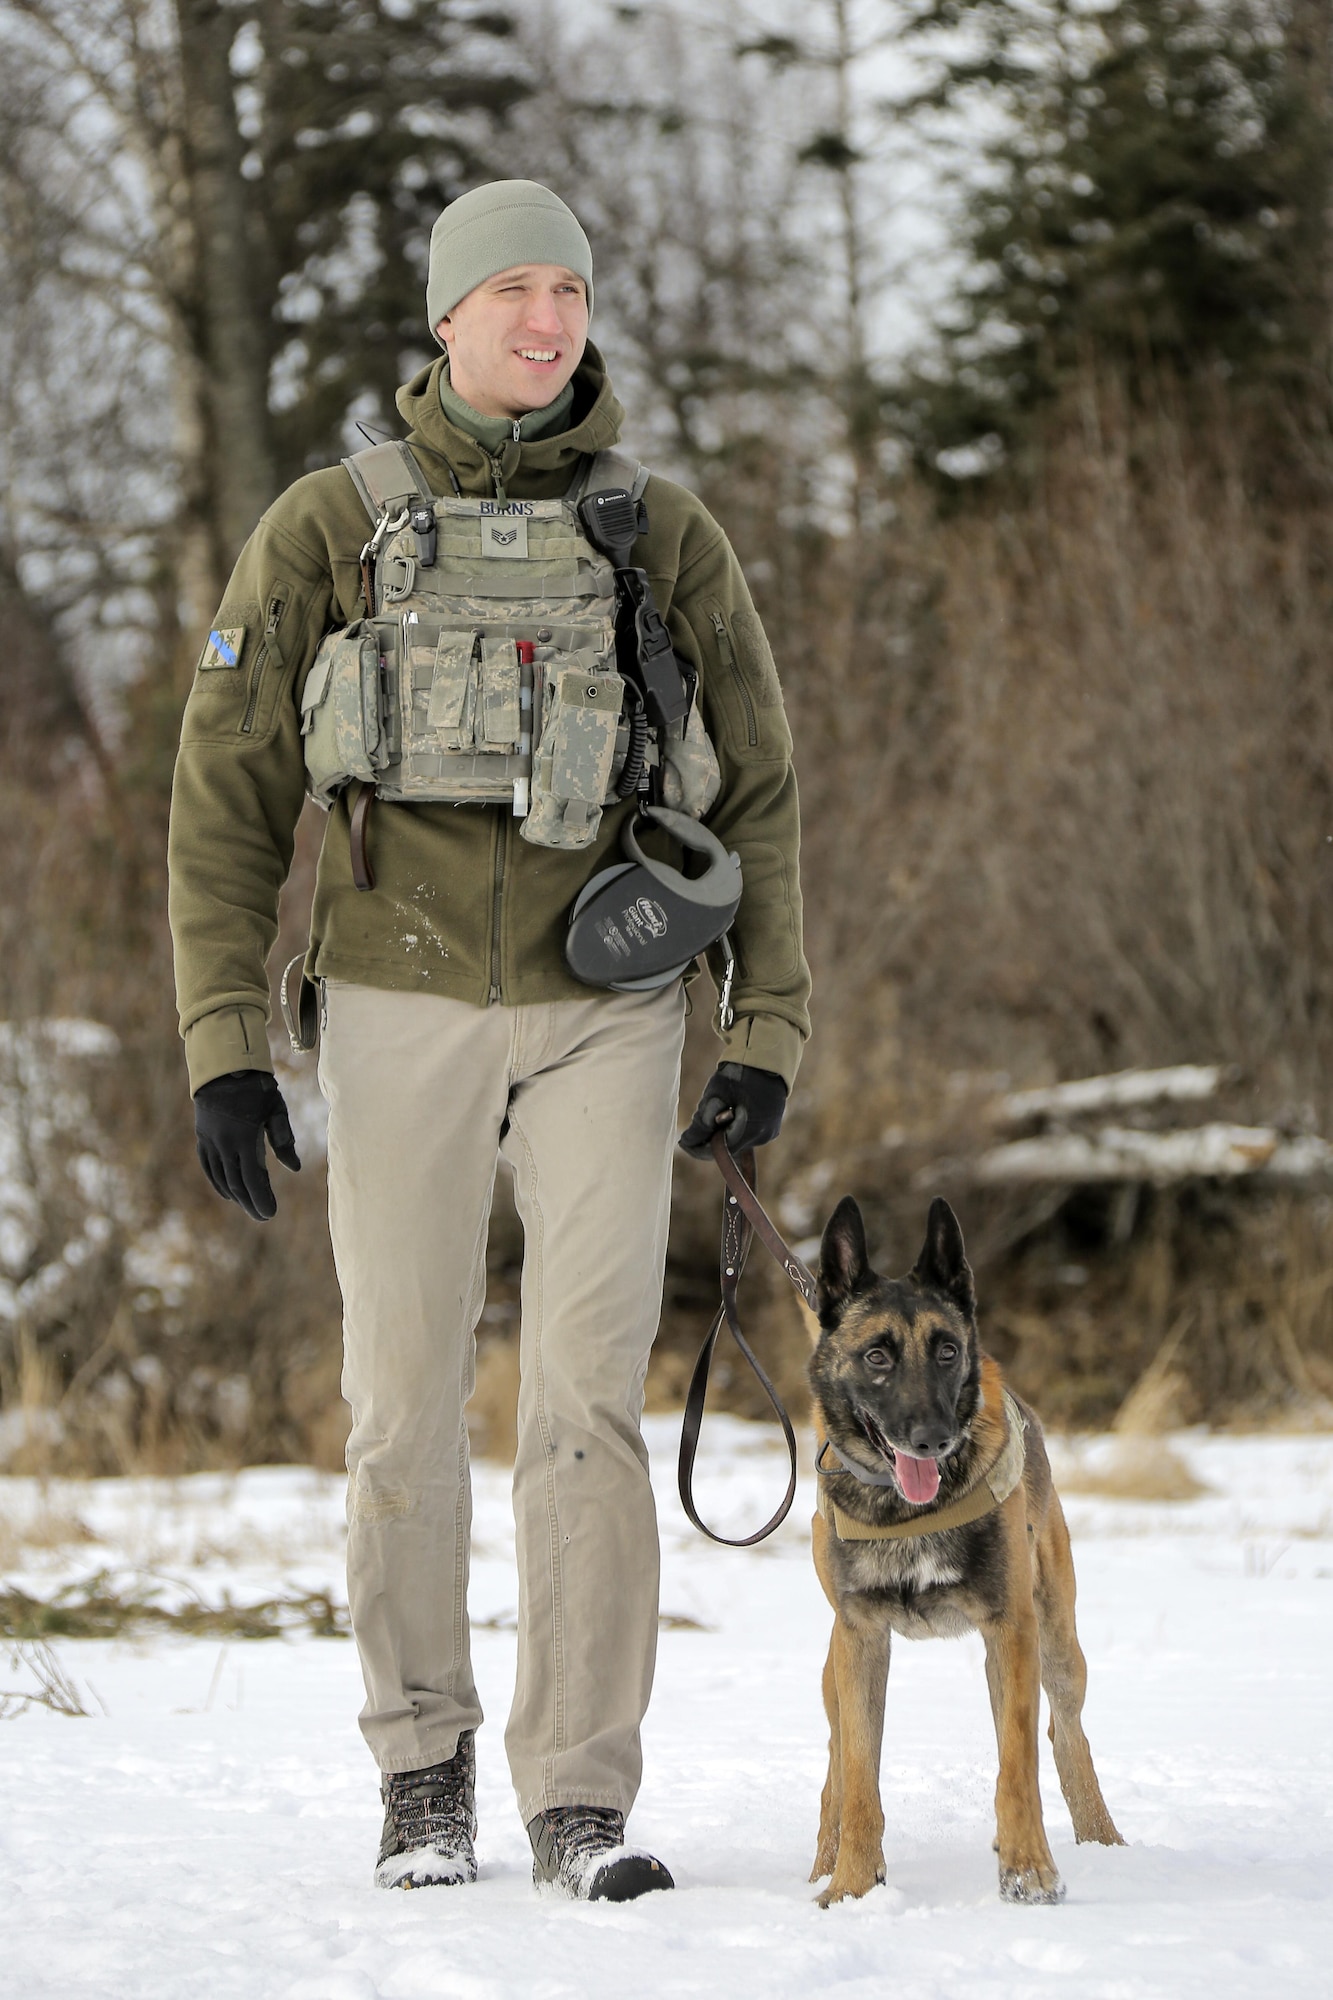 U.S. Air Force Staff Sgt. Joe Burns and military working dog, Ciko, assigned to the 673rd Security Forces Squadron, conduct K-9 training at Joint Base Elmendorf-Richardson, Alaska, March 17, 2016. The Security Forces Airmen conducted the K-9 training with their Army counterparts, assigned to the 549th Military Working Dog Detachment, to keep their teams flexible to respond to law enforcement emergencies, and for overseas deployments. (U.S. Air Force photo/Alejandro Pena)